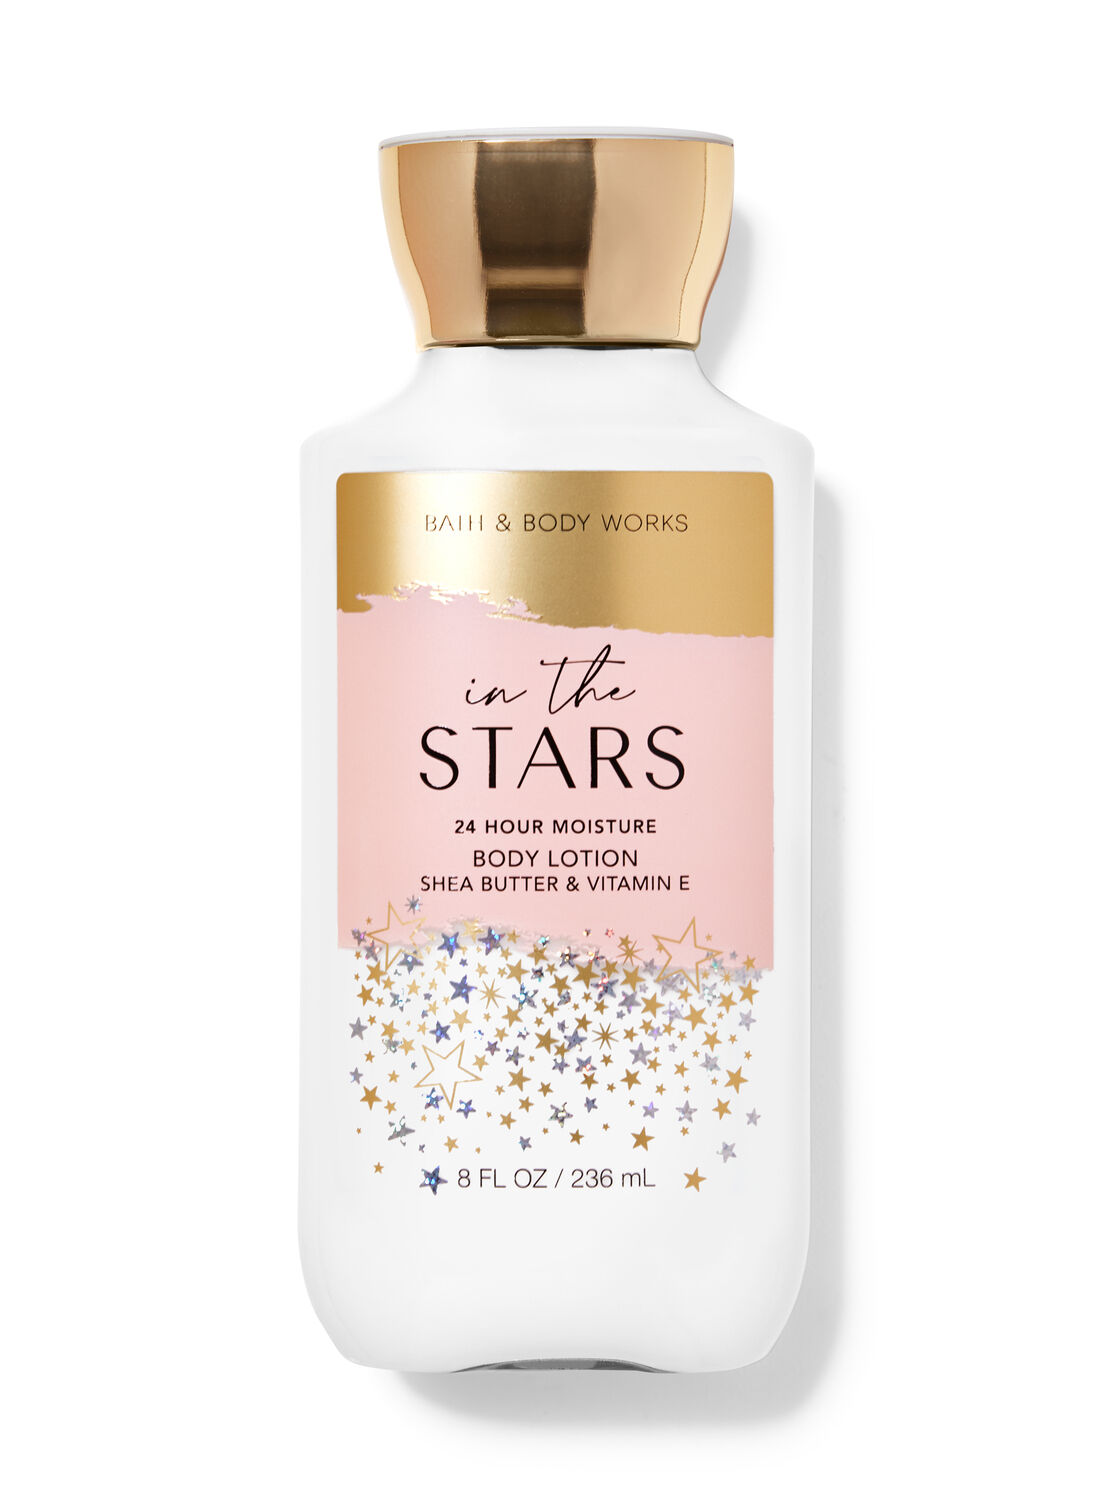 In the stars bath and body works